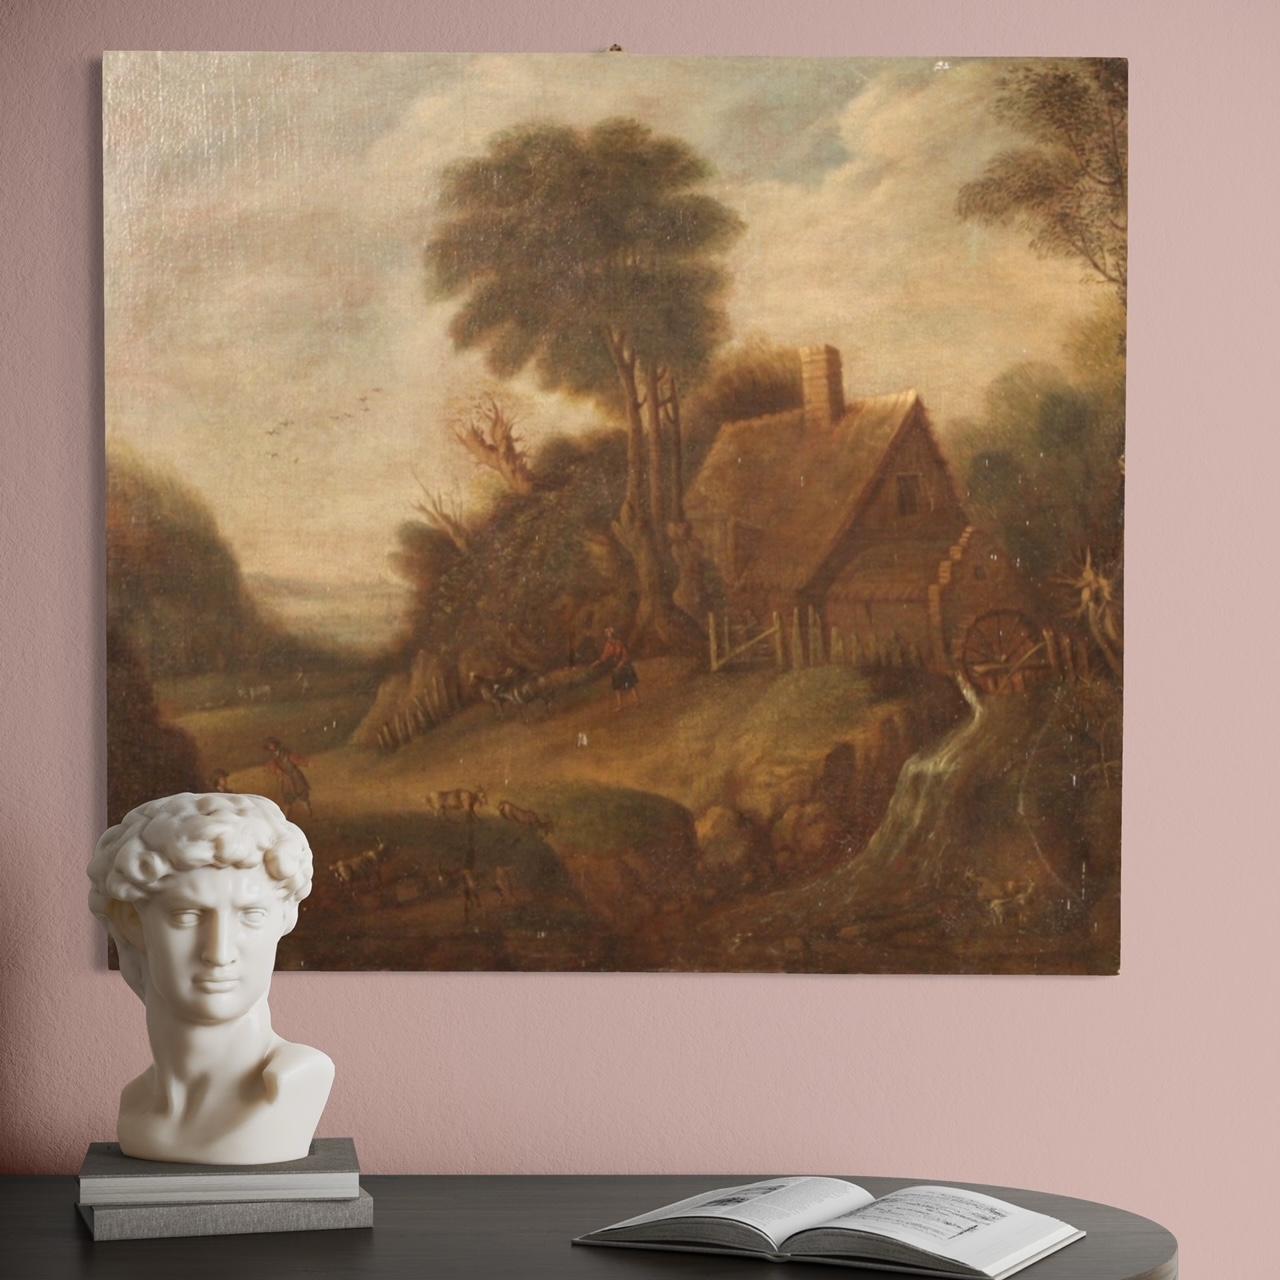 Antique Flemish painting from the early 19th century. Oil painting on canvas depicting countryside landscape with characters and animals and nice pictorial quality. Painting rich in elements and details, of a rustic nature, for antique dealers and